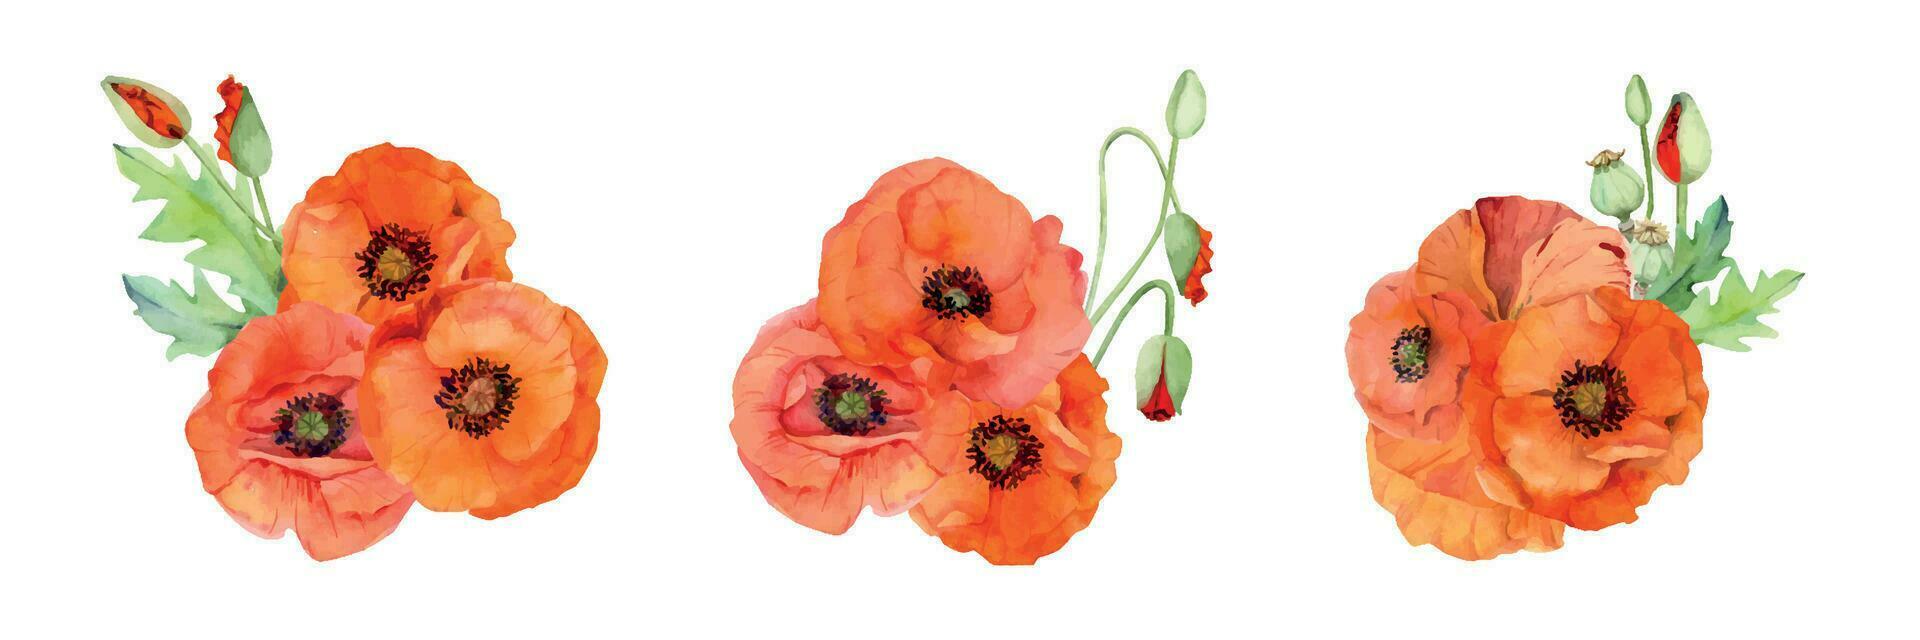 Watercolor bouquet composition, elements with hand drawn summer bright red poppy flowers. Isolated on white background. Design for invitations, wedding, love or greeting cards, paper, print, textile vector